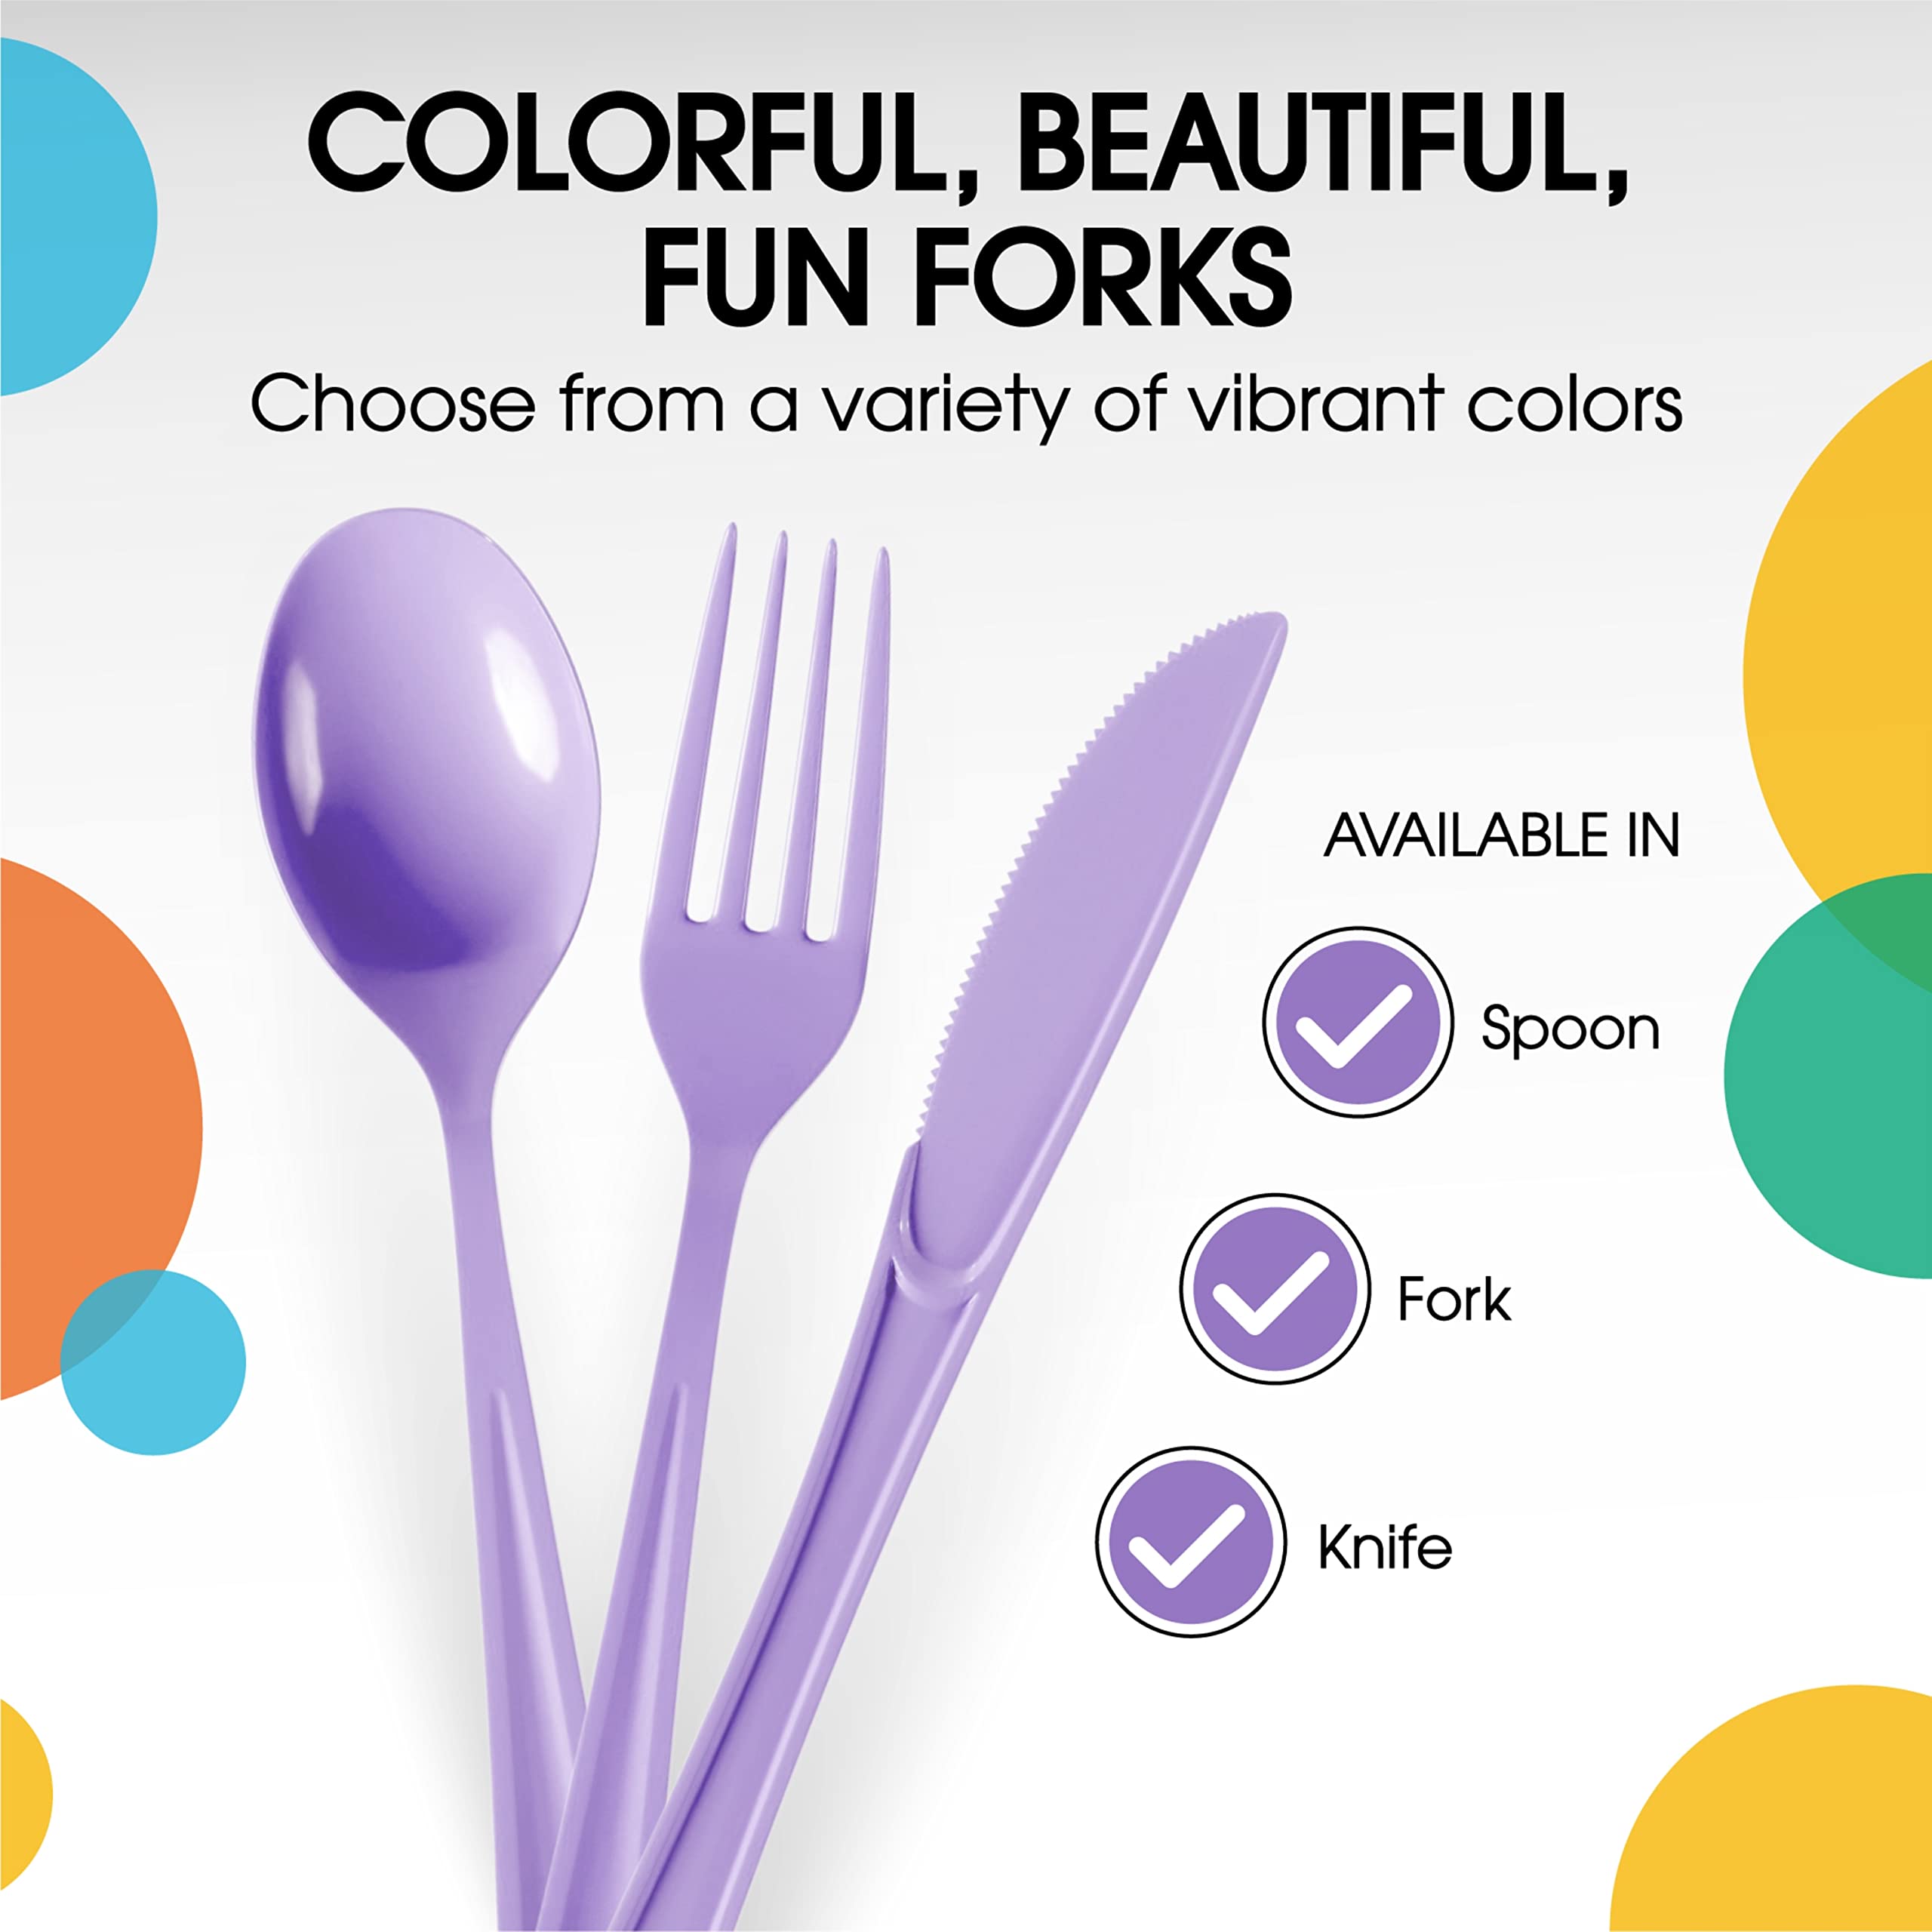 Heavy Duty Lavender Plastic Forks | 50 Count